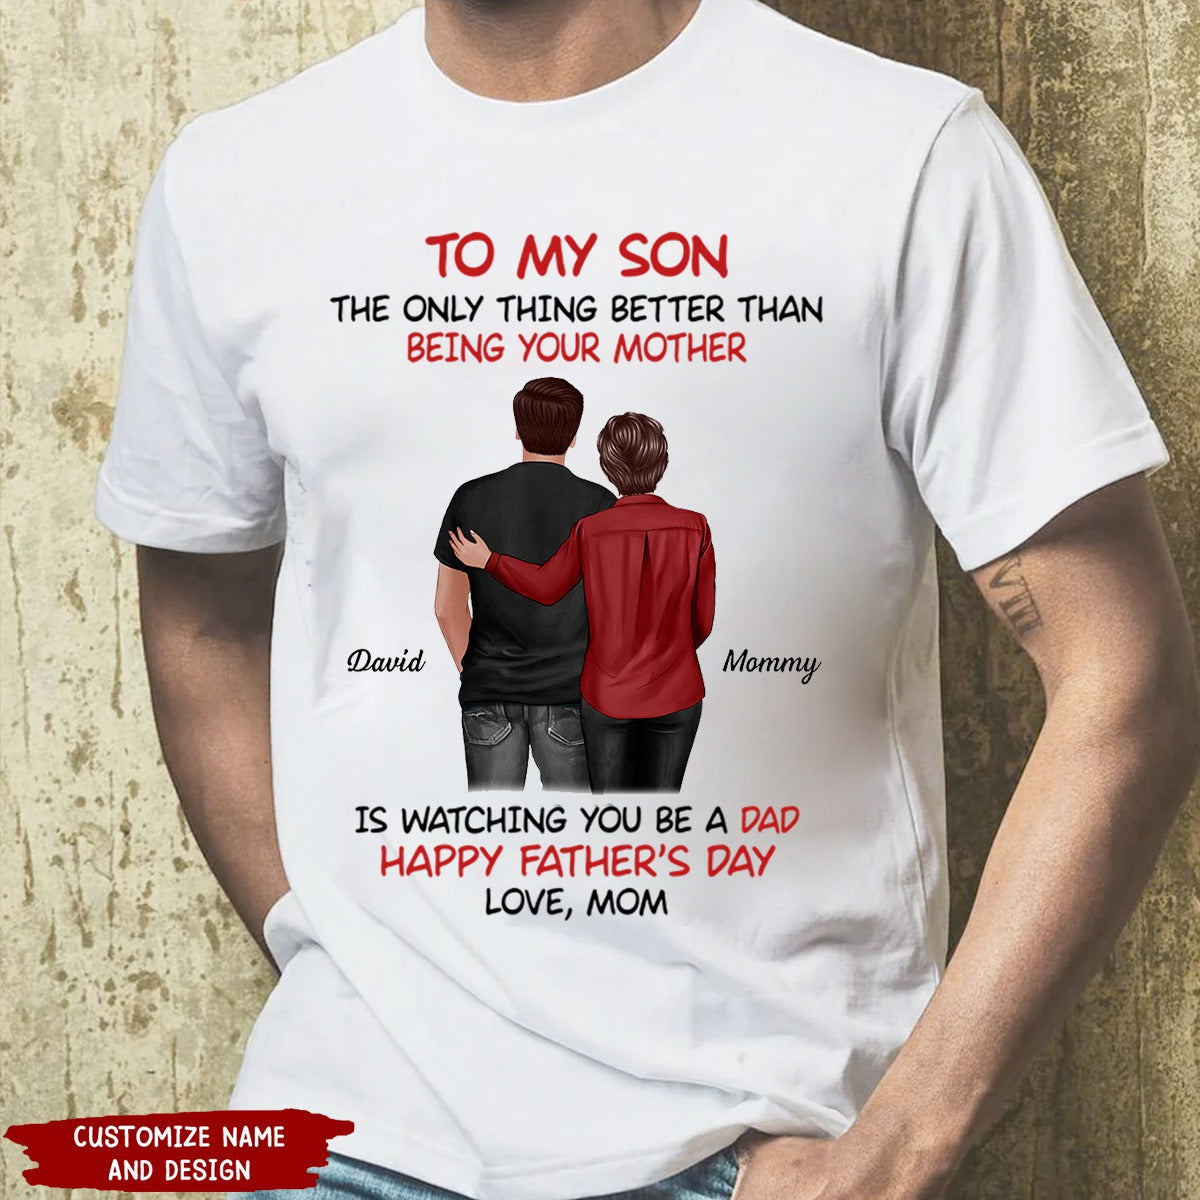 From Mom To Son Happy Father's Day Personalized Shirt, Heartfelt Father's Day Gift For Son